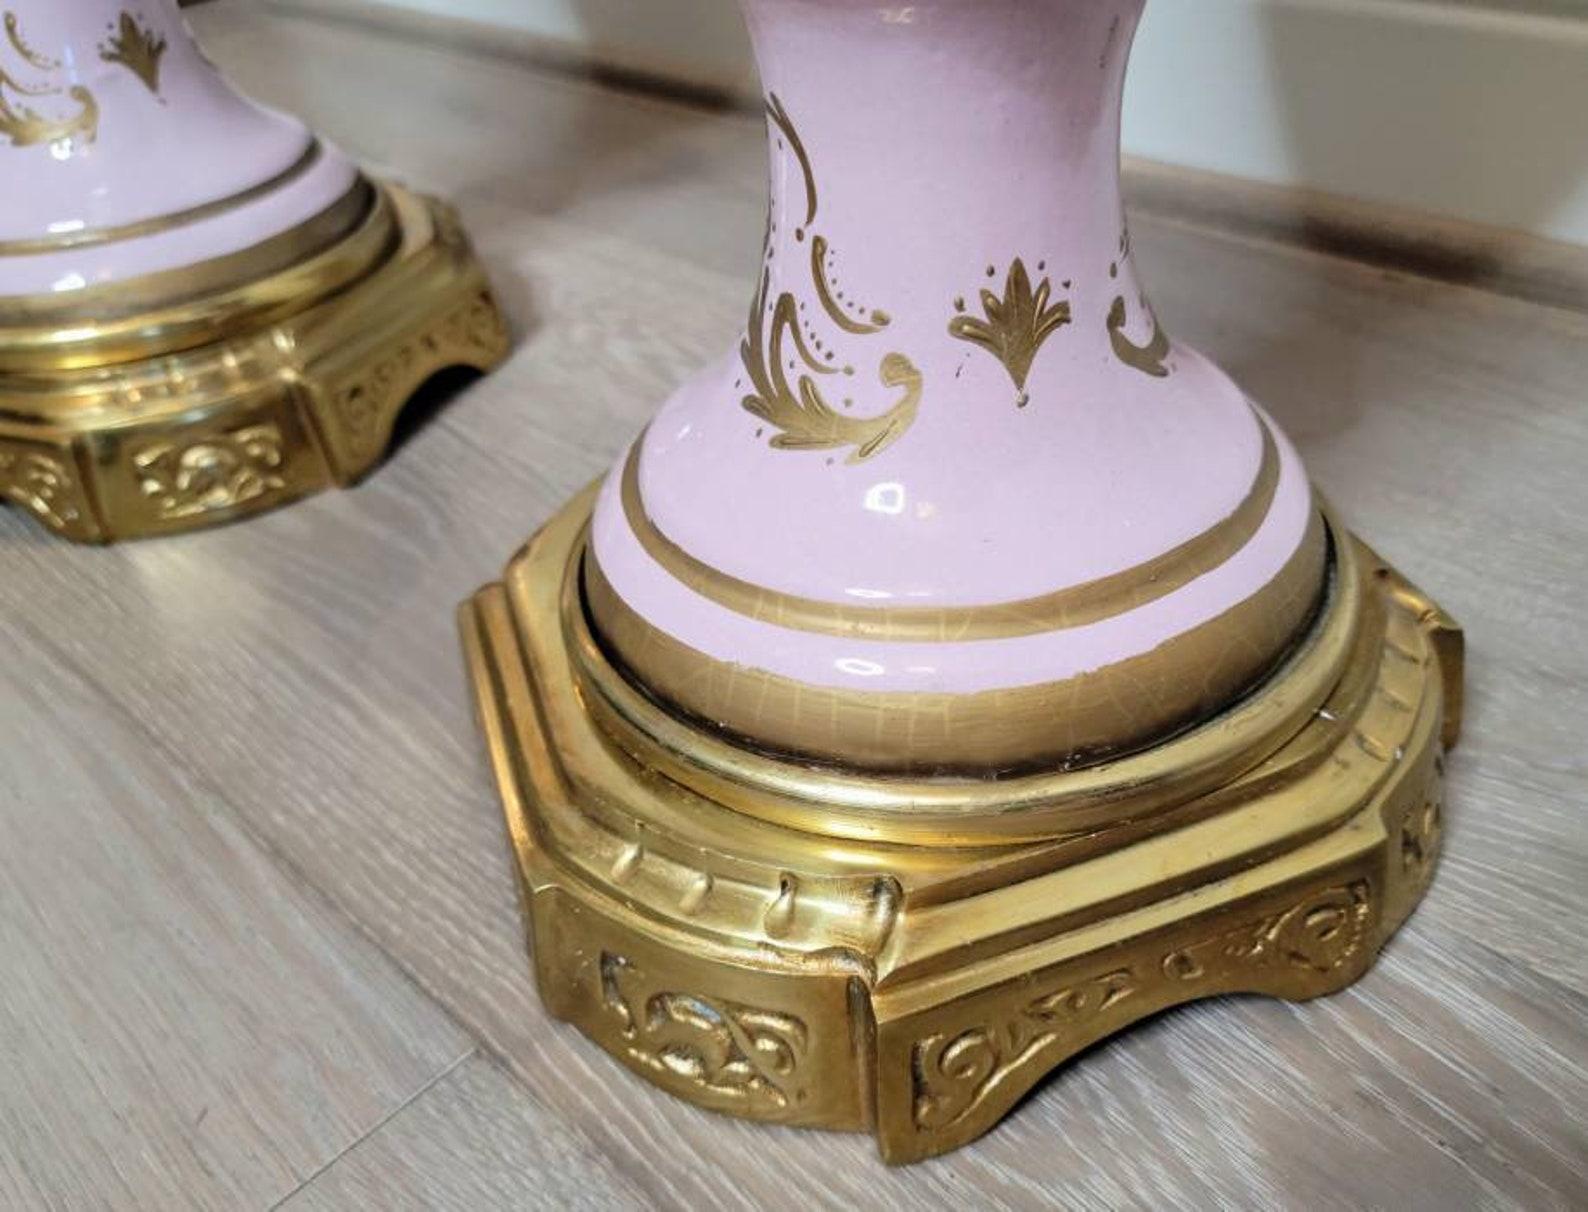 Monumental 19th Century French Empire Sèvres Style Porcelain Urns, a Pair For Sale 5